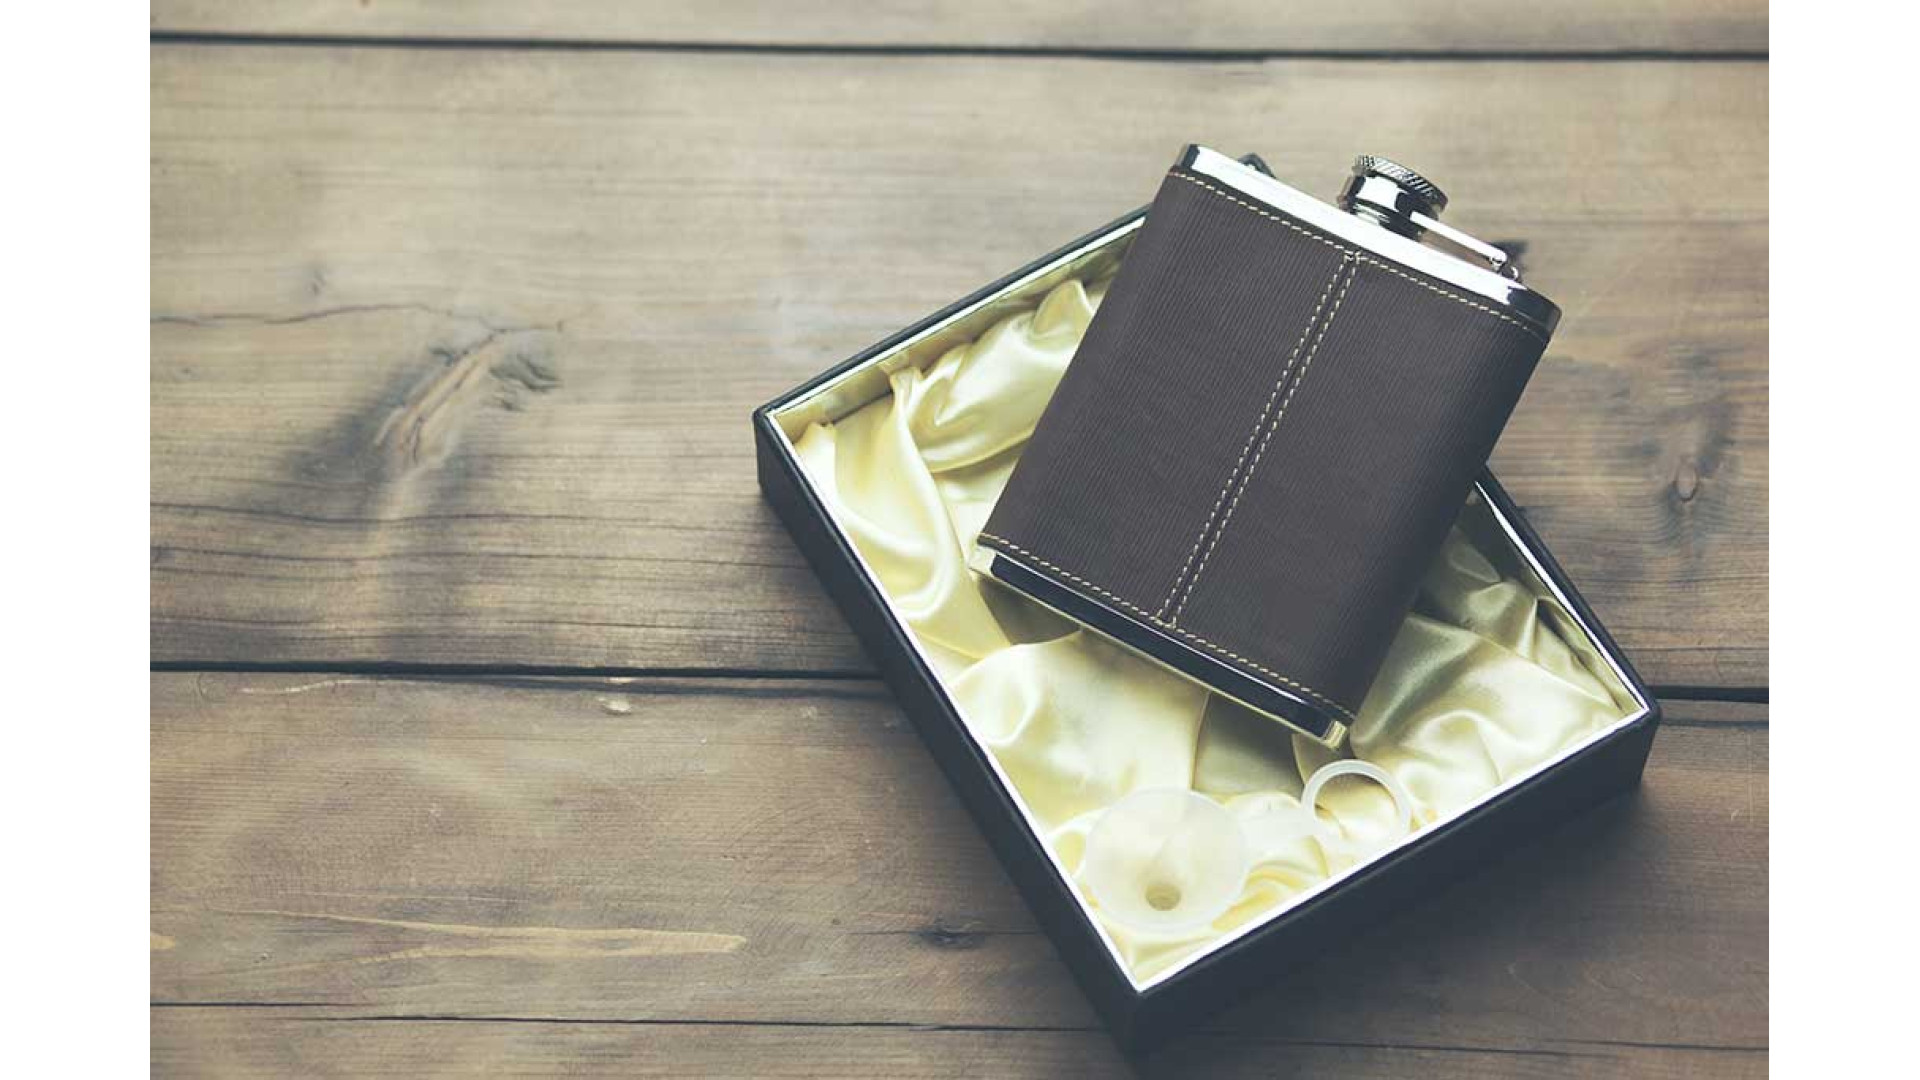 https://www.ckbproducts.com/image/cache/catalog/Ckb%20blog/why-a-hip-flask-makes-a-great-gift-1920x1080.jpg